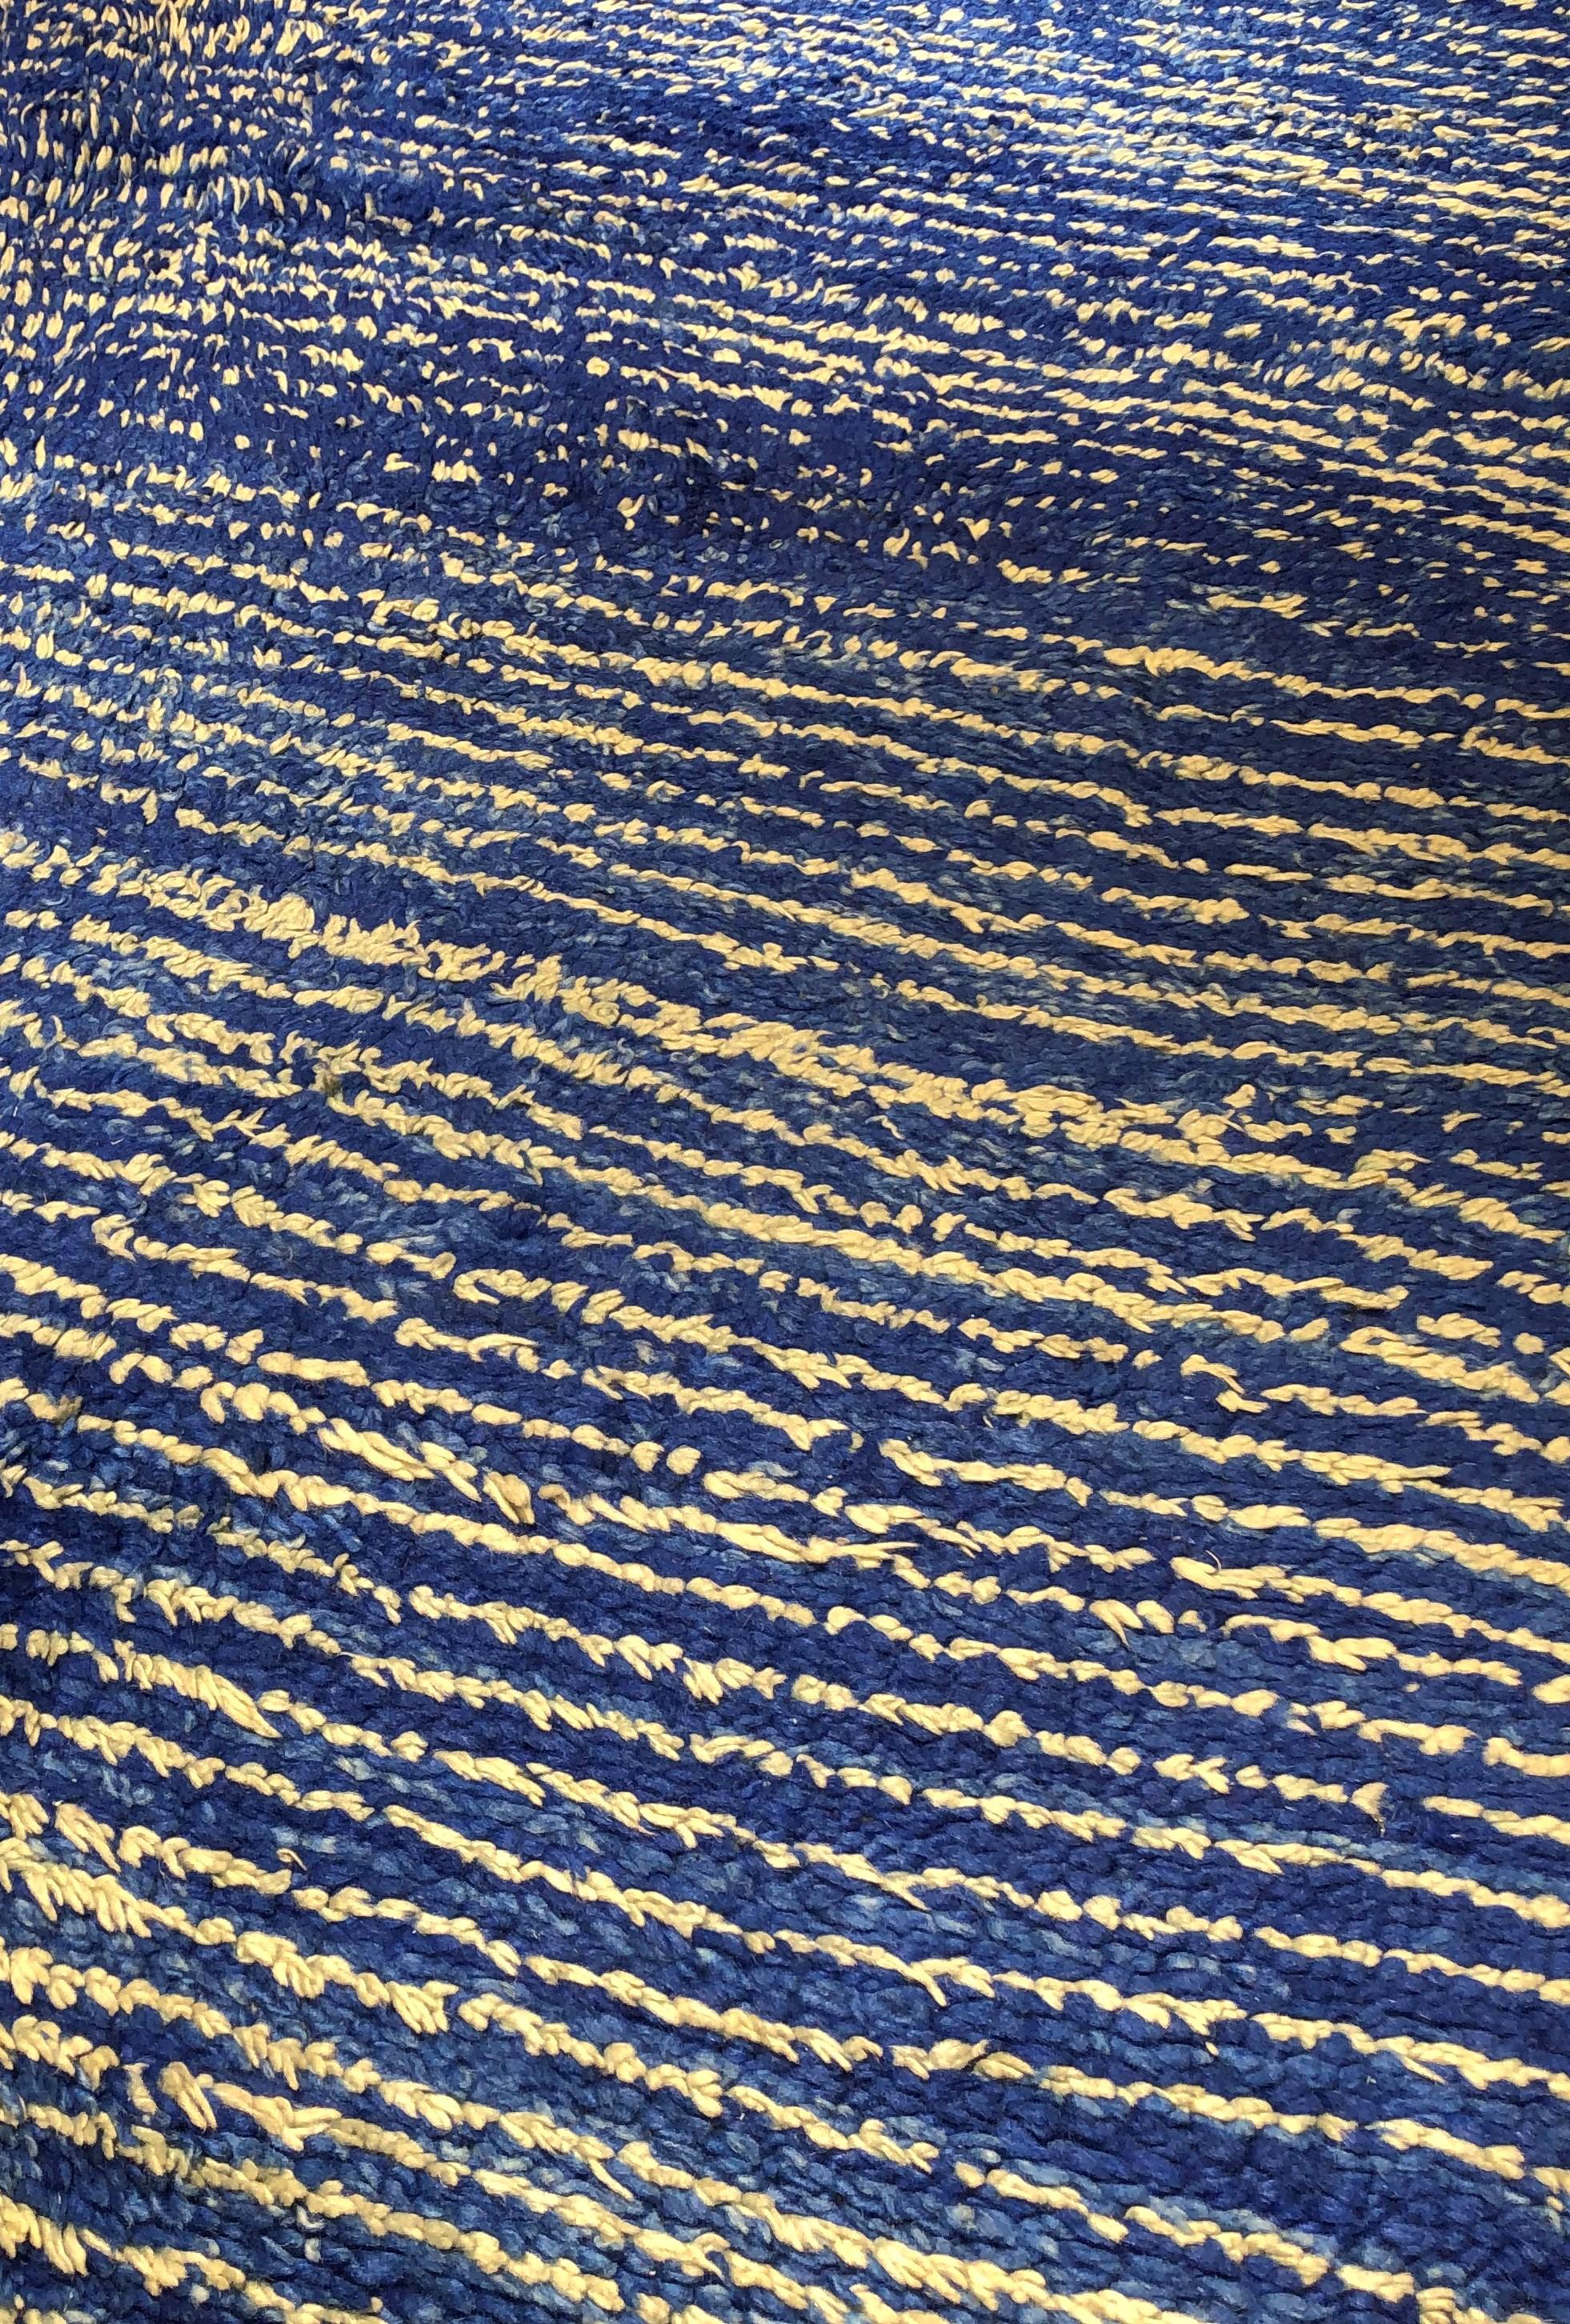 Berber carpet, Morocco, particularly rare for its graphic composition and colour. 
The thick wool is shiny and dyed with a cobalt blue mixes with shades of natural white wool to form irregular lines like waves that slide into the sea.